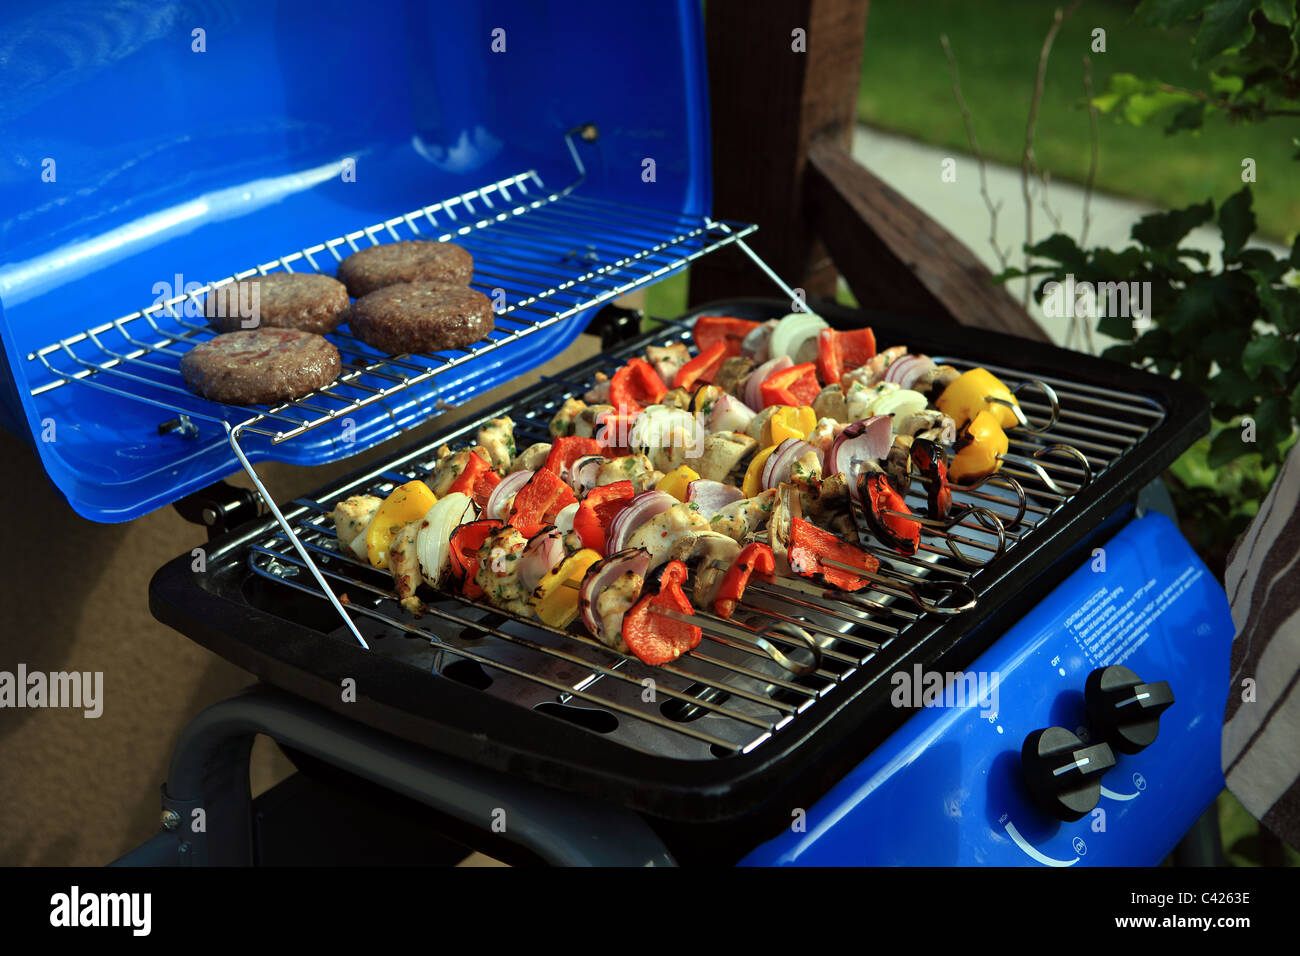 BBQ with vegetables on skewers and burgers Stock Photo